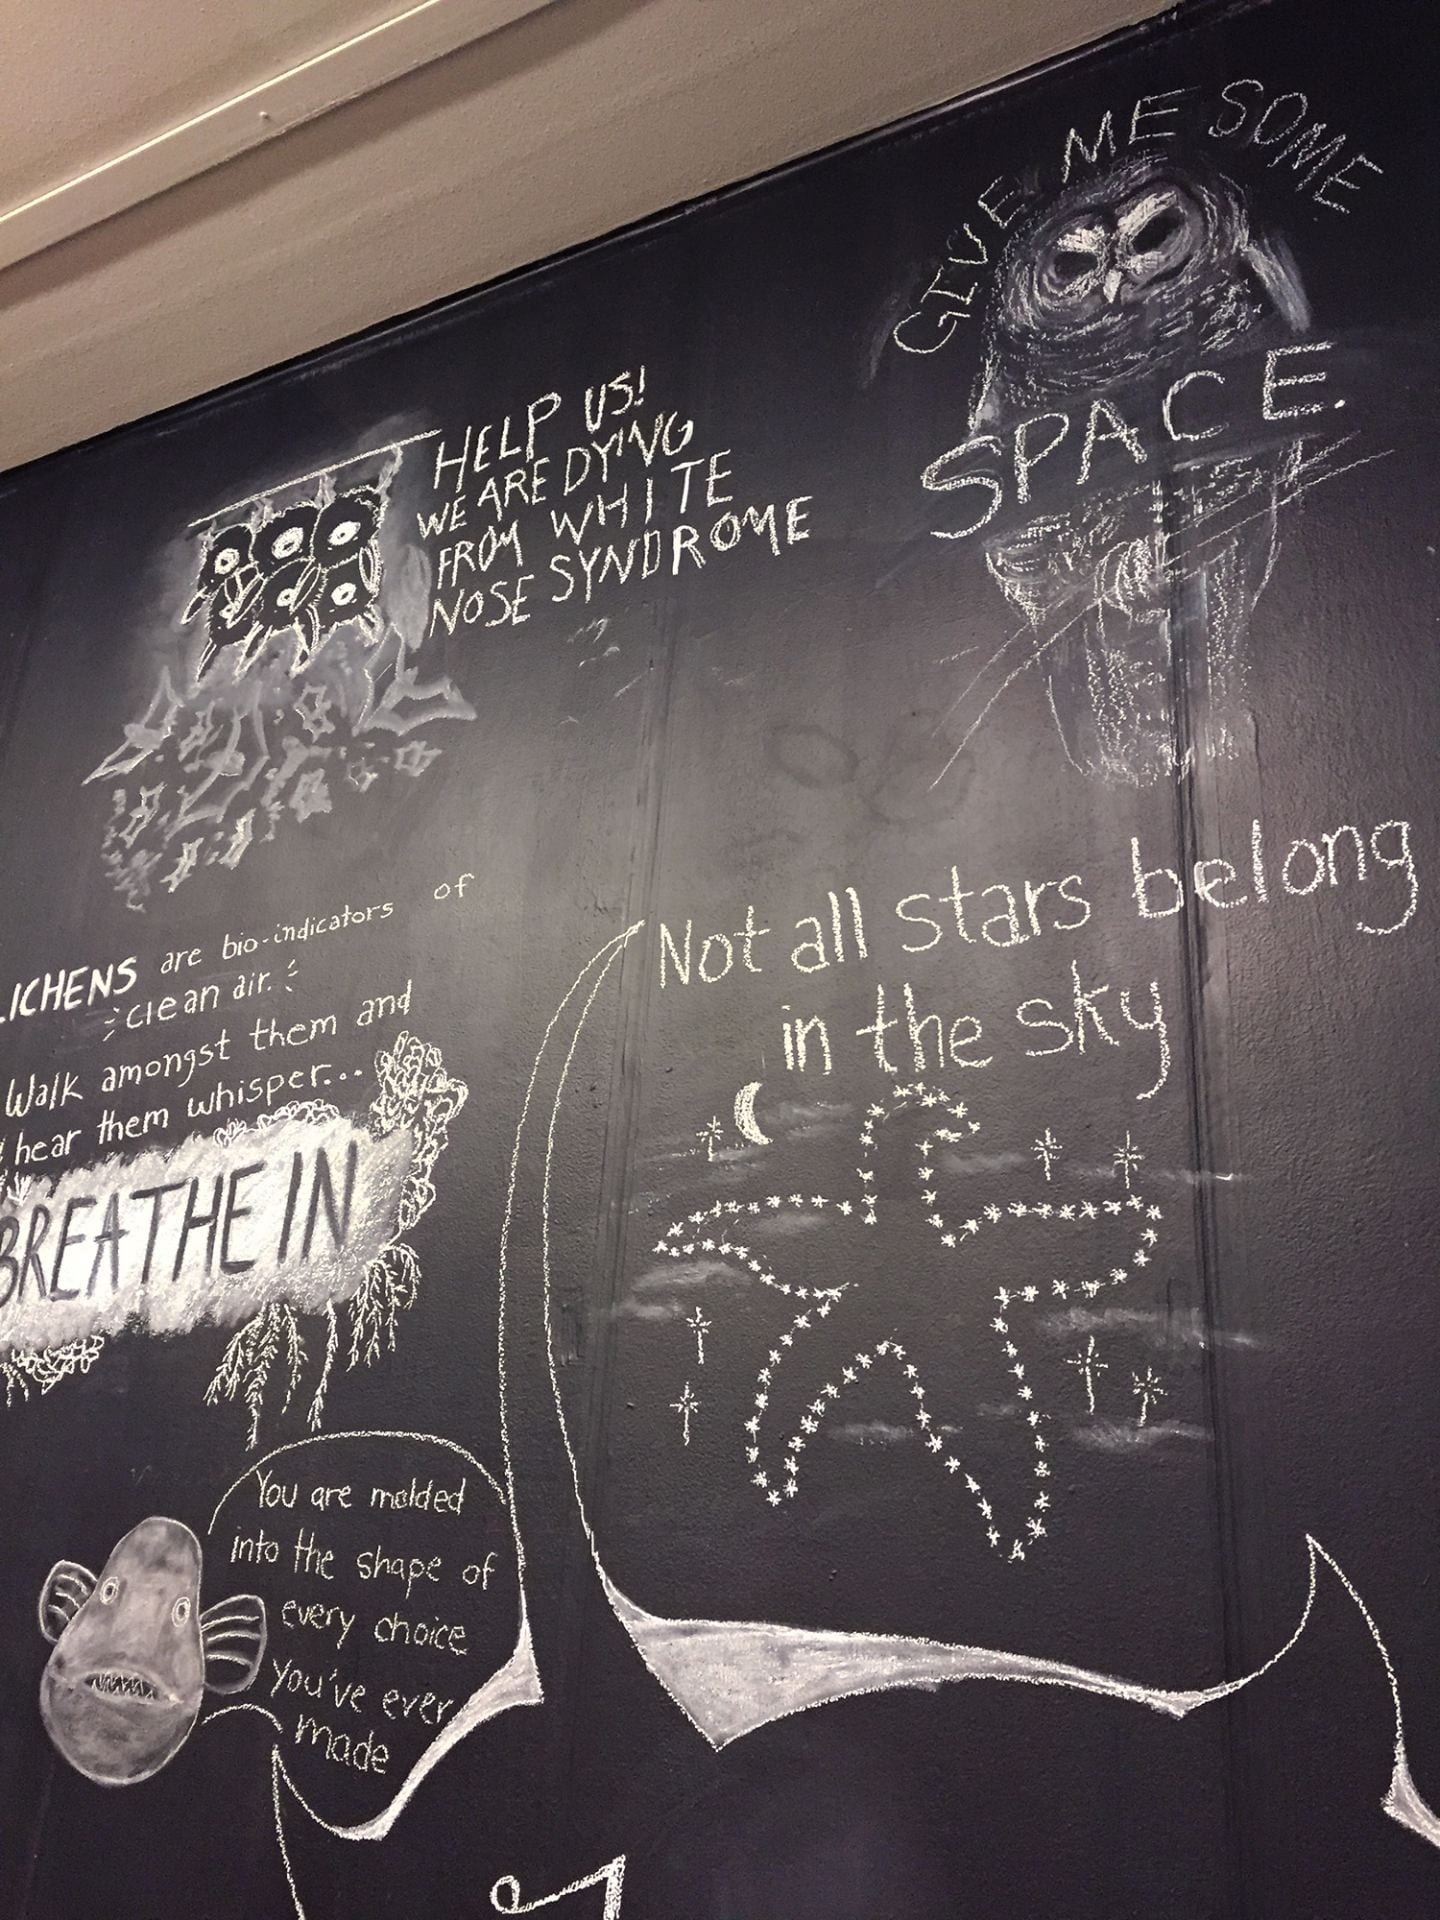 multiple labeled drawings on a chalkboard: bats with words "help us! we are dying from white nose syndrome", an owl labeled "give me some space", a starfish labeled "Not all stars belong in the sky", and a fish labeled "you are molded into the shape of every choice you've ever made"